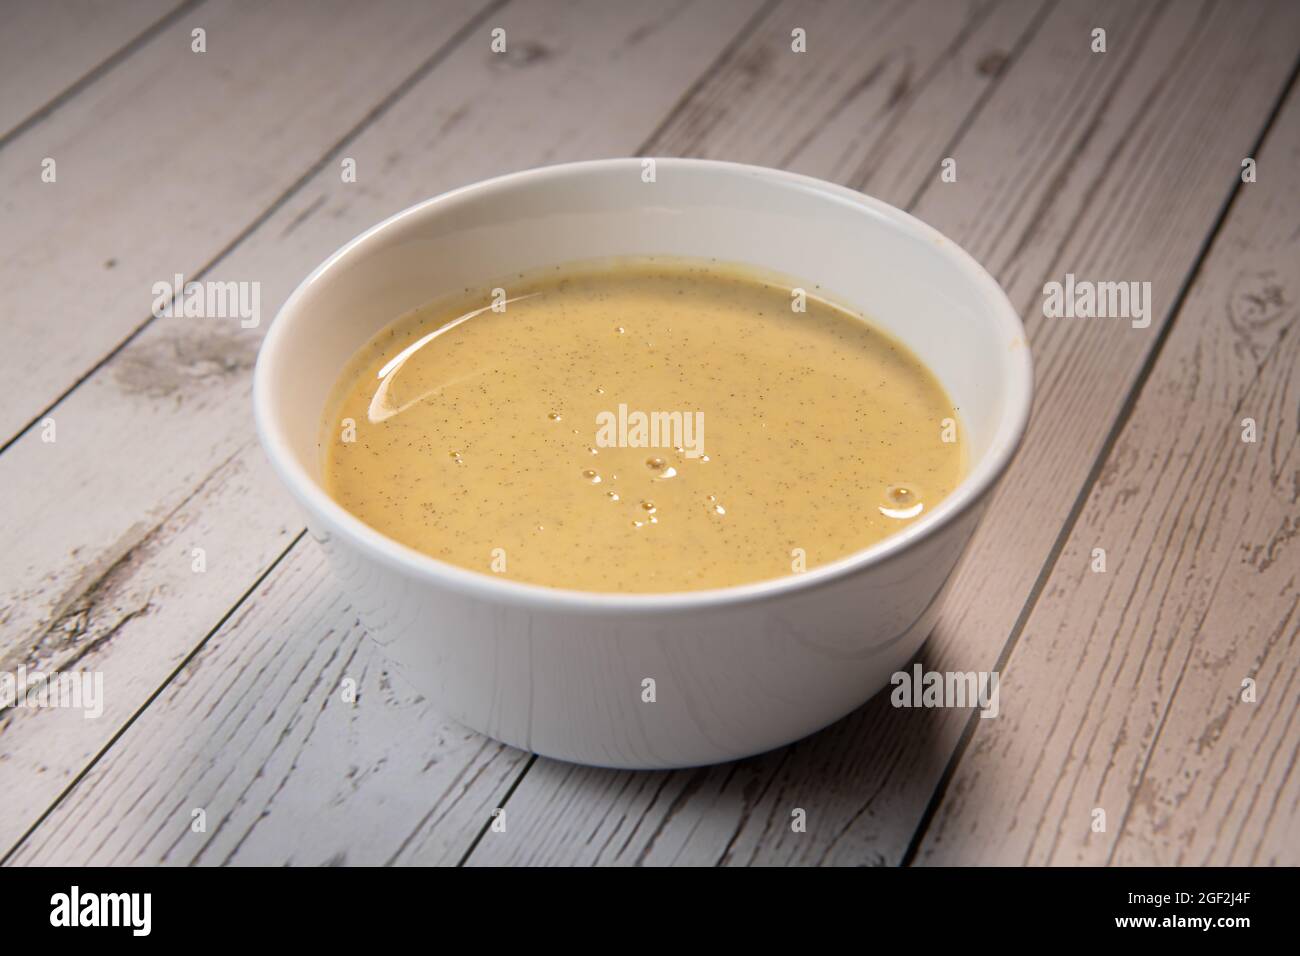 Recipe for custard, pastry base to accompany your desserts Stock Photo